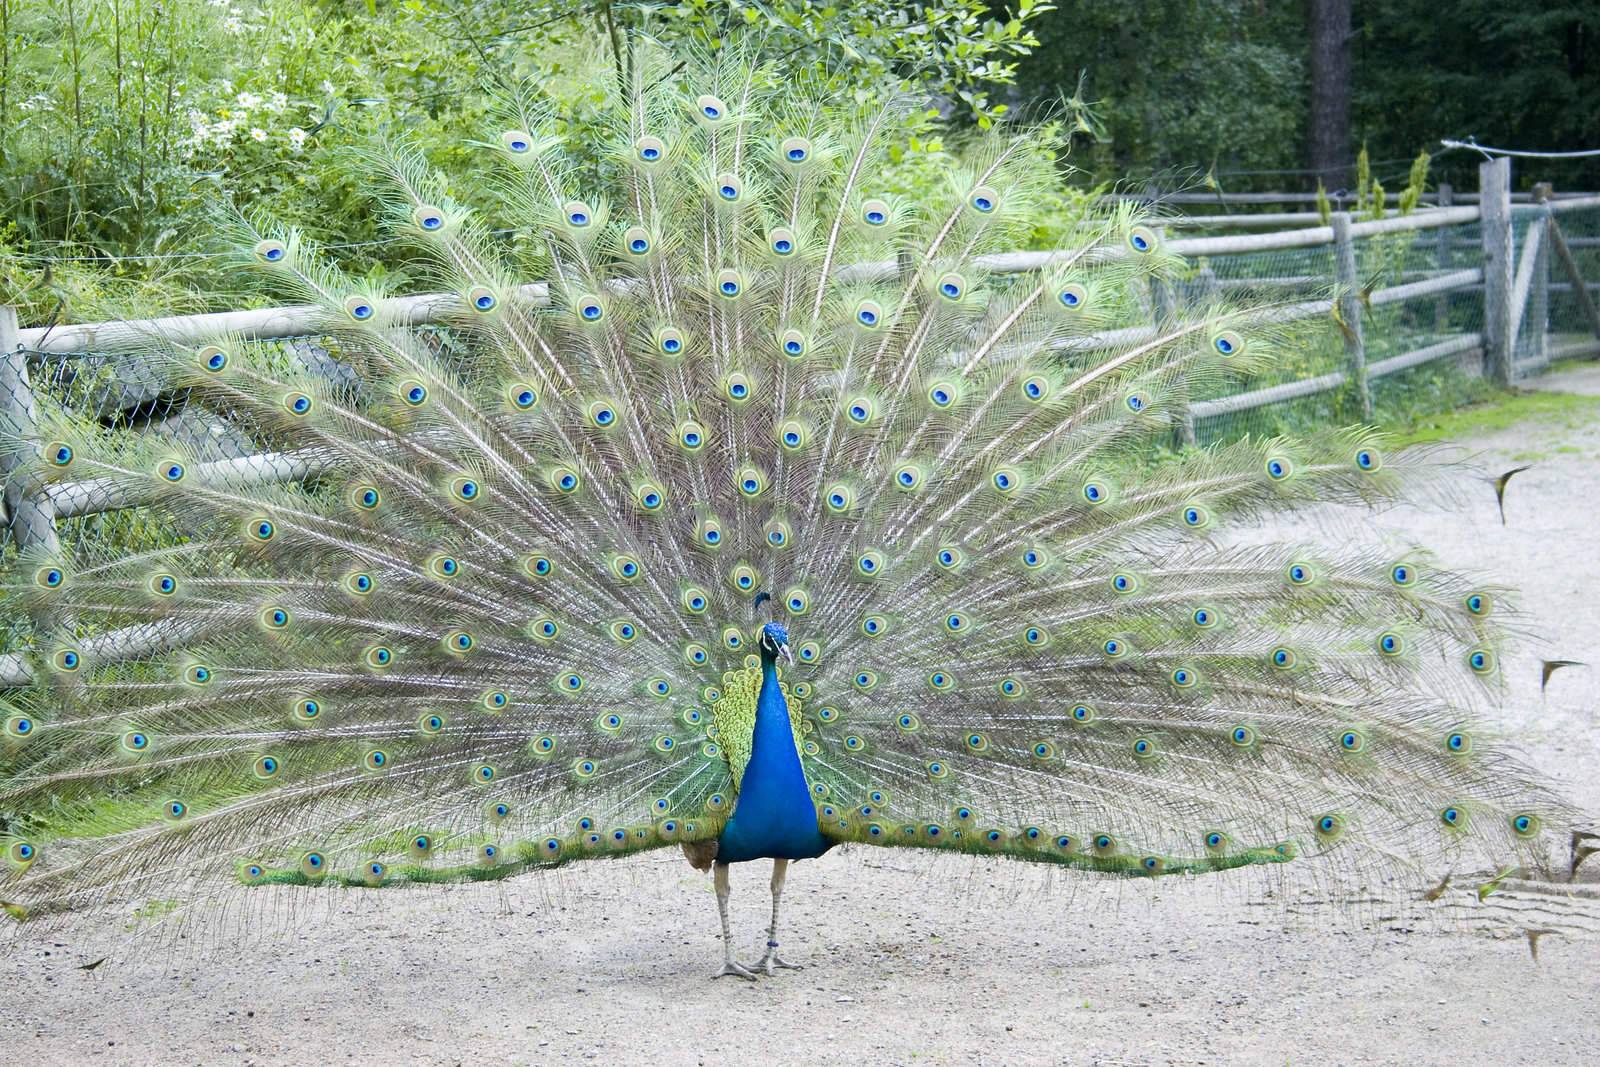 Male peacock spreading out its feathers